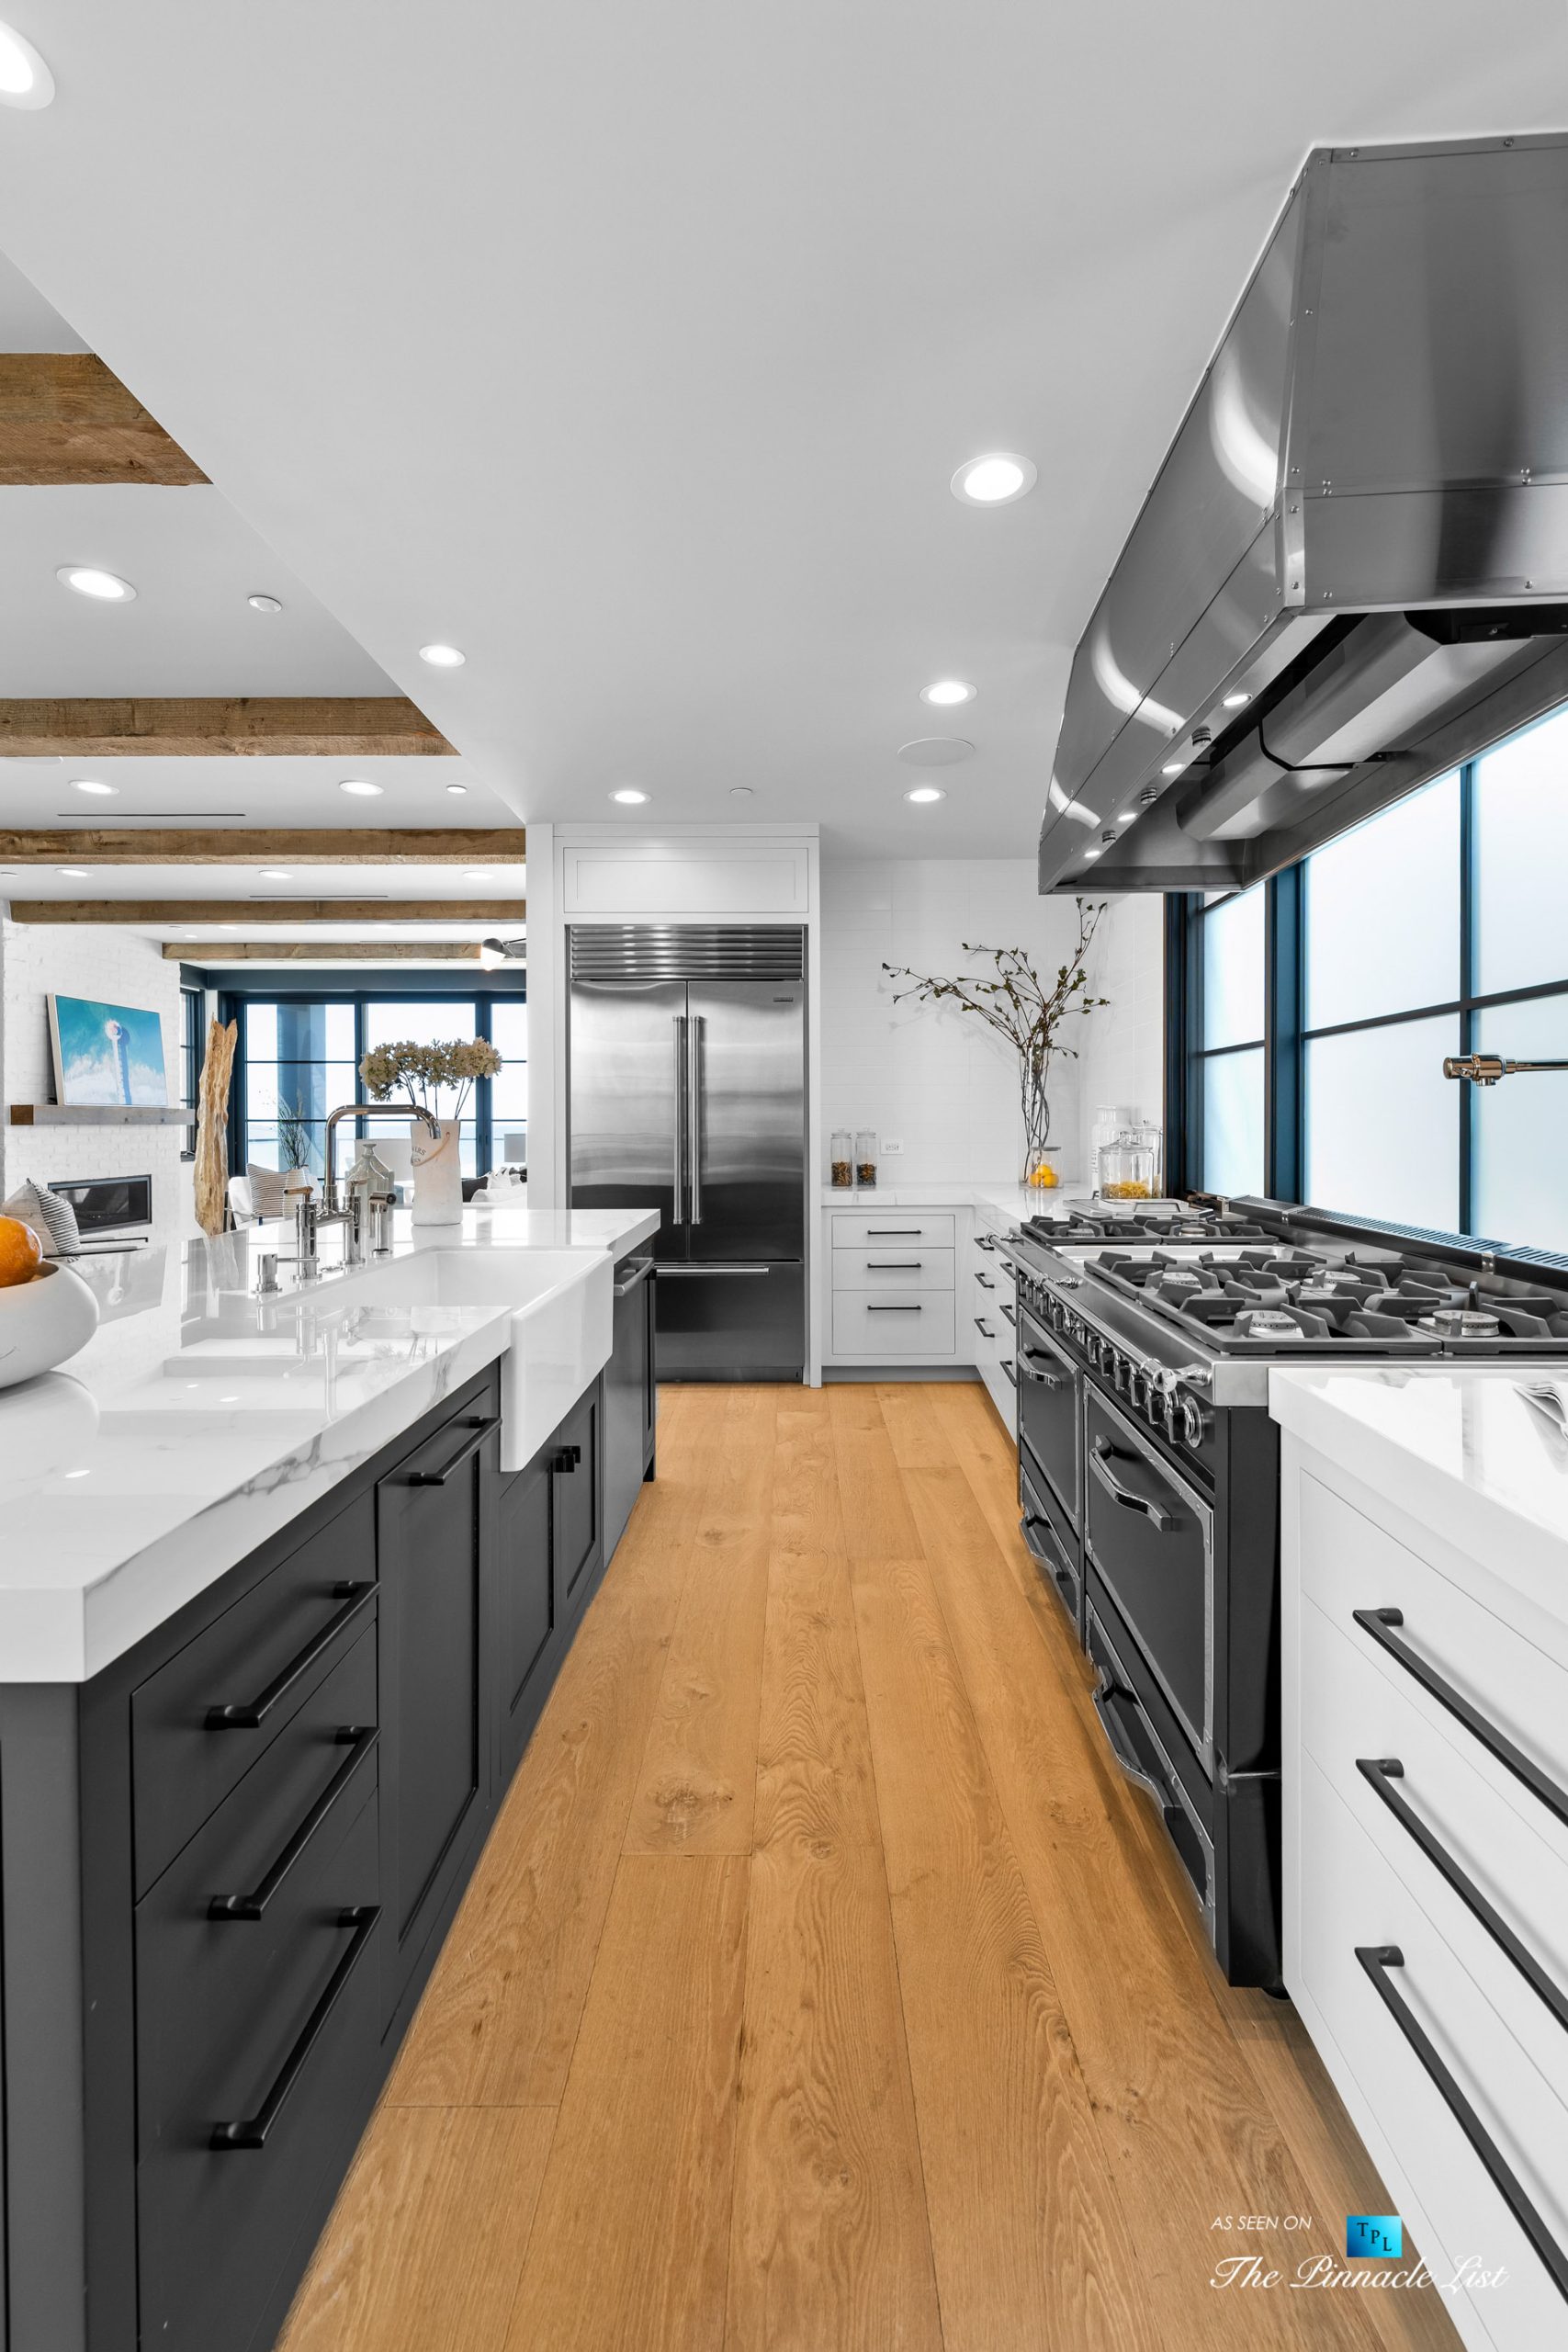 508 The Strand, Manhattan Beach, CA, USA - Kitchen Gas Stoves and Range Hood - Luxury Real Estate - Oceanfront Home